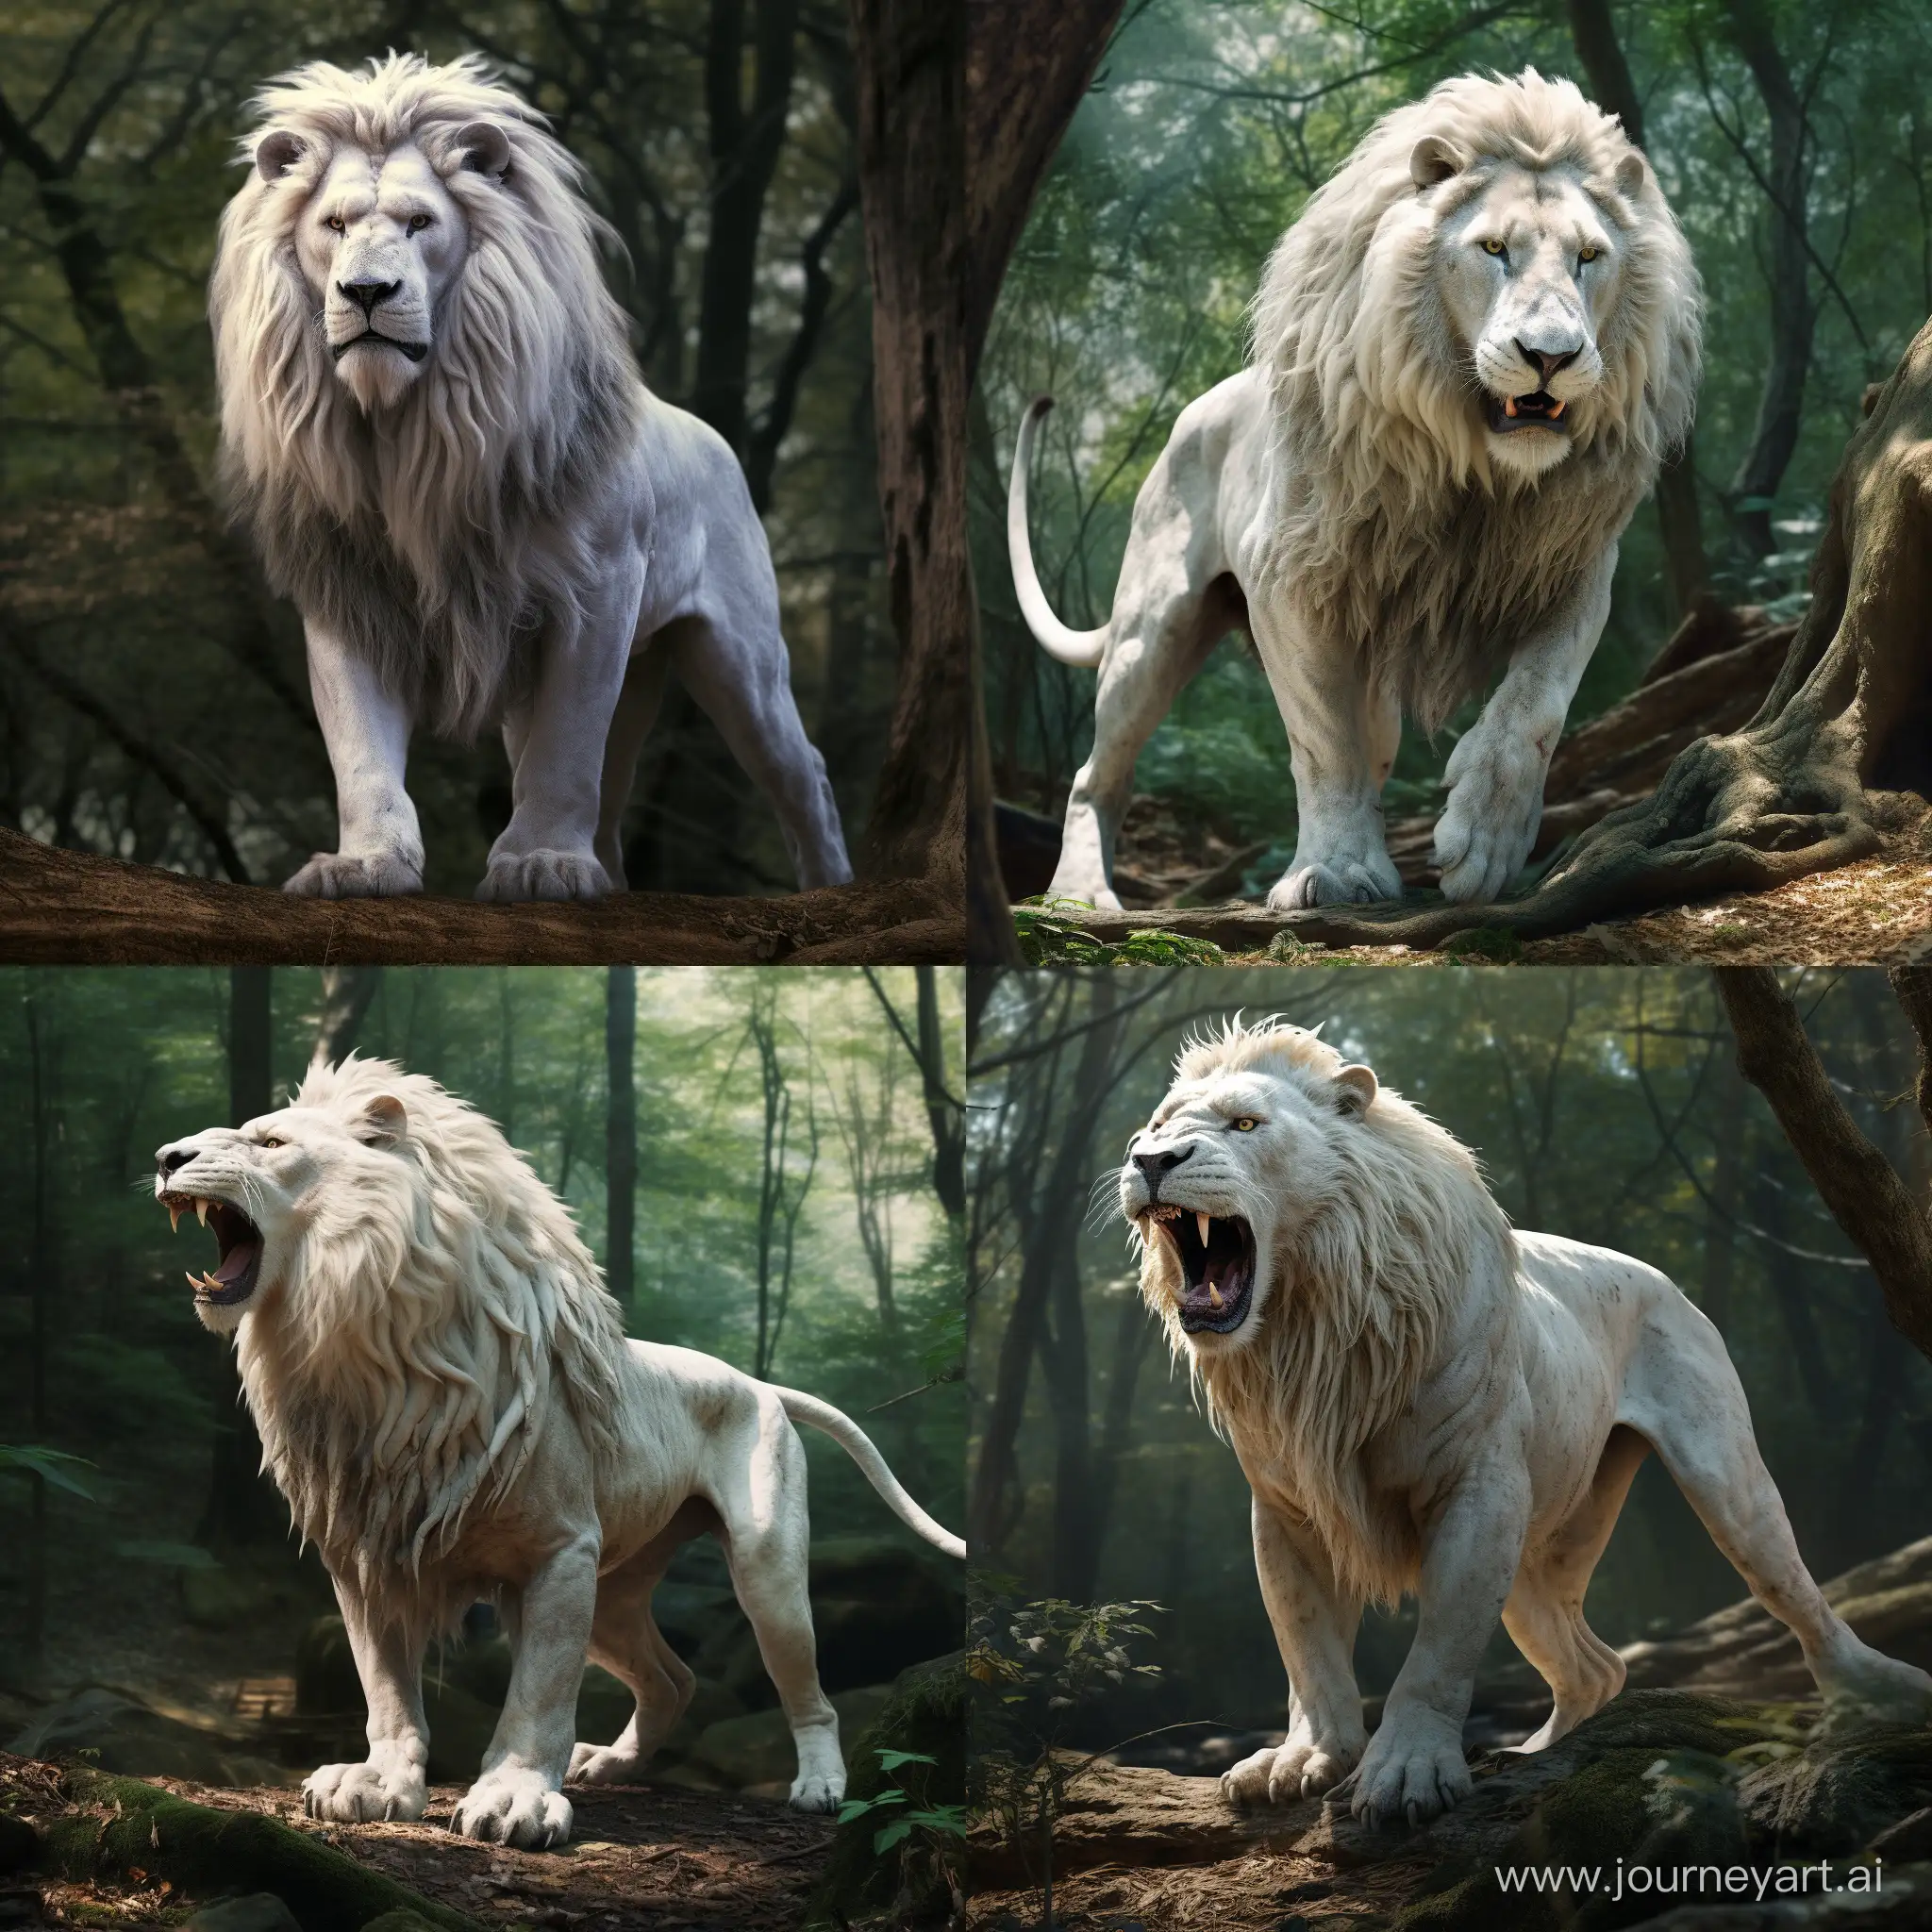 Proud-White-Lion-in-Enchanting-Forest-Scene